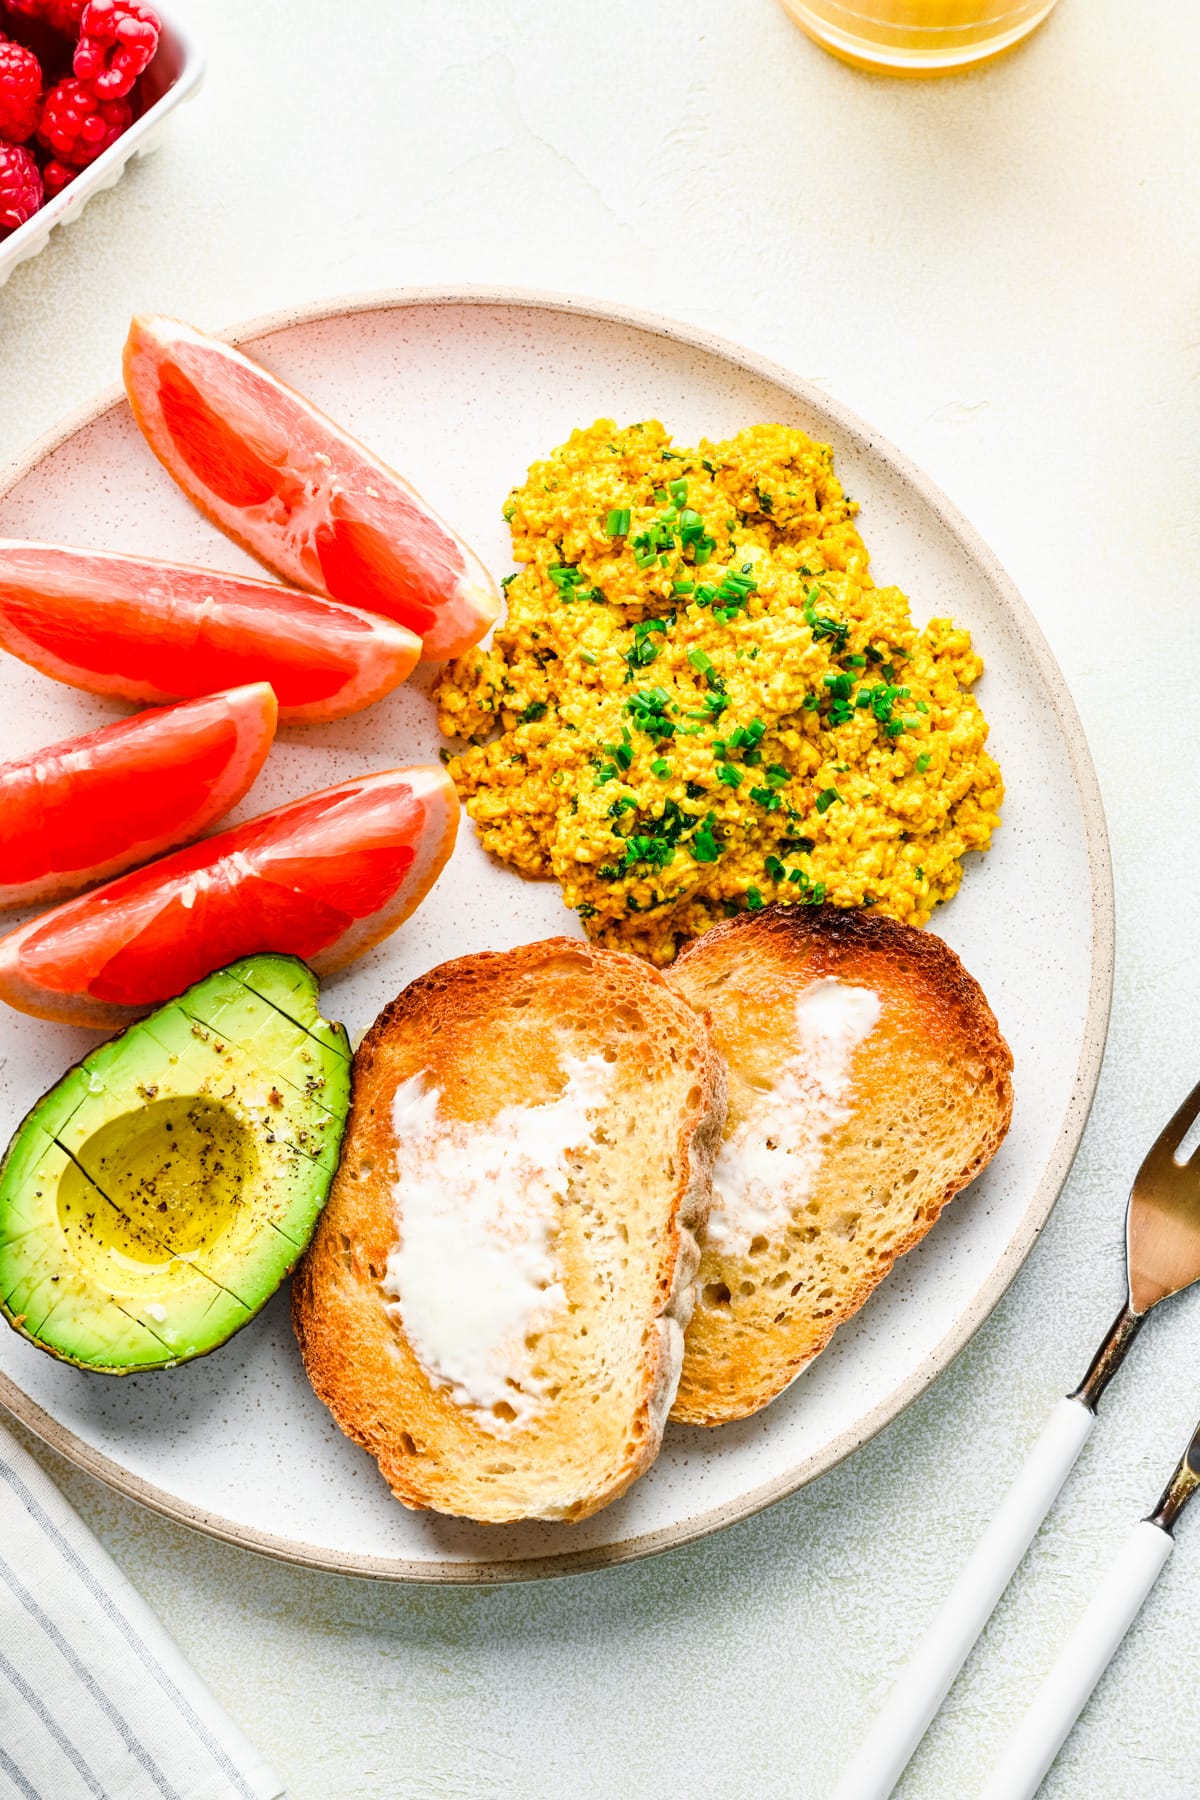 Overhead of the finished silken tofu scramble on a brunch plate with toast, avocado, and grapefruit.